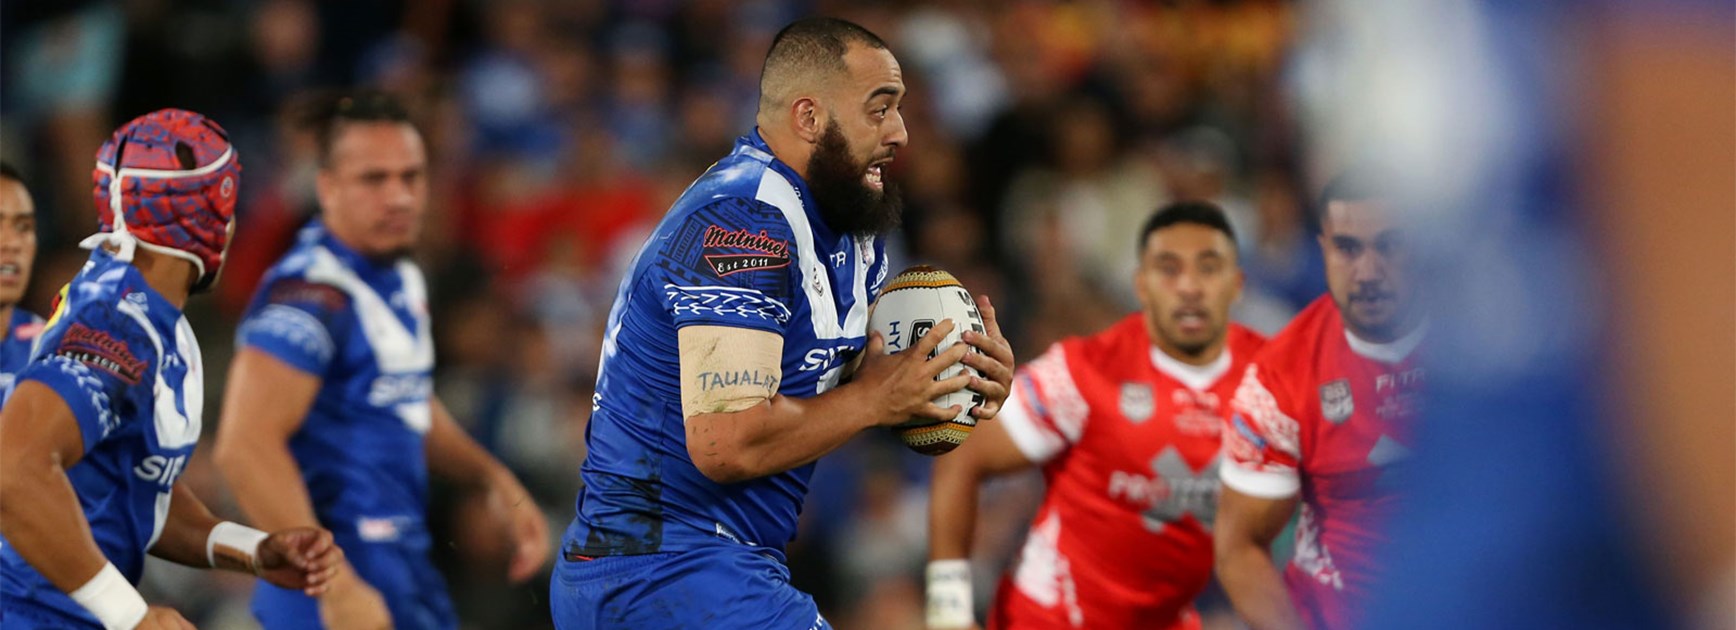 Frank Pritchard takes a hit-up for Samoa against Tonga on Saturday night.